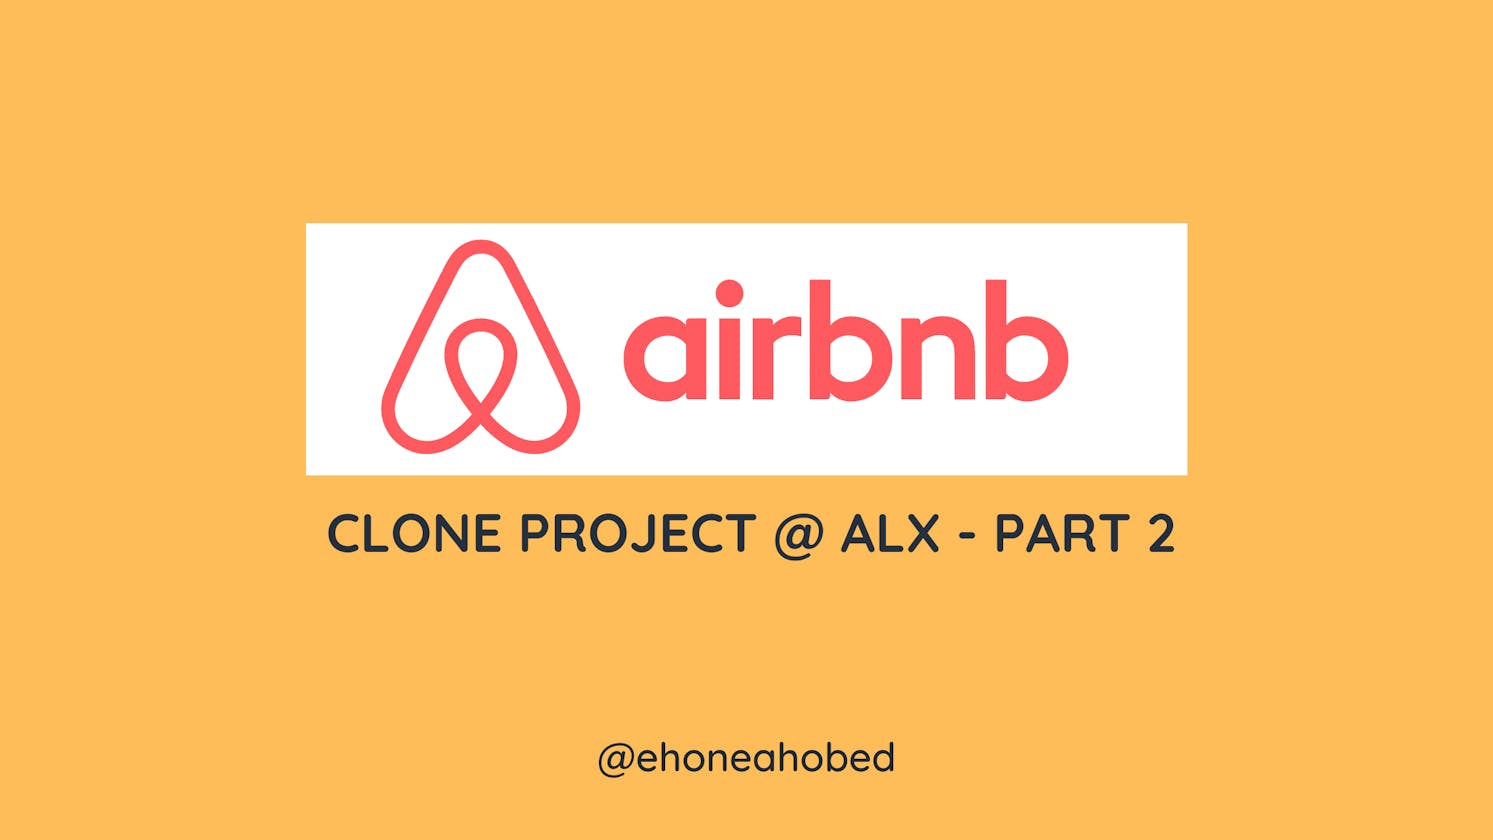 AirBnB Clone Webstatic Project - Challenges & Lessons learned